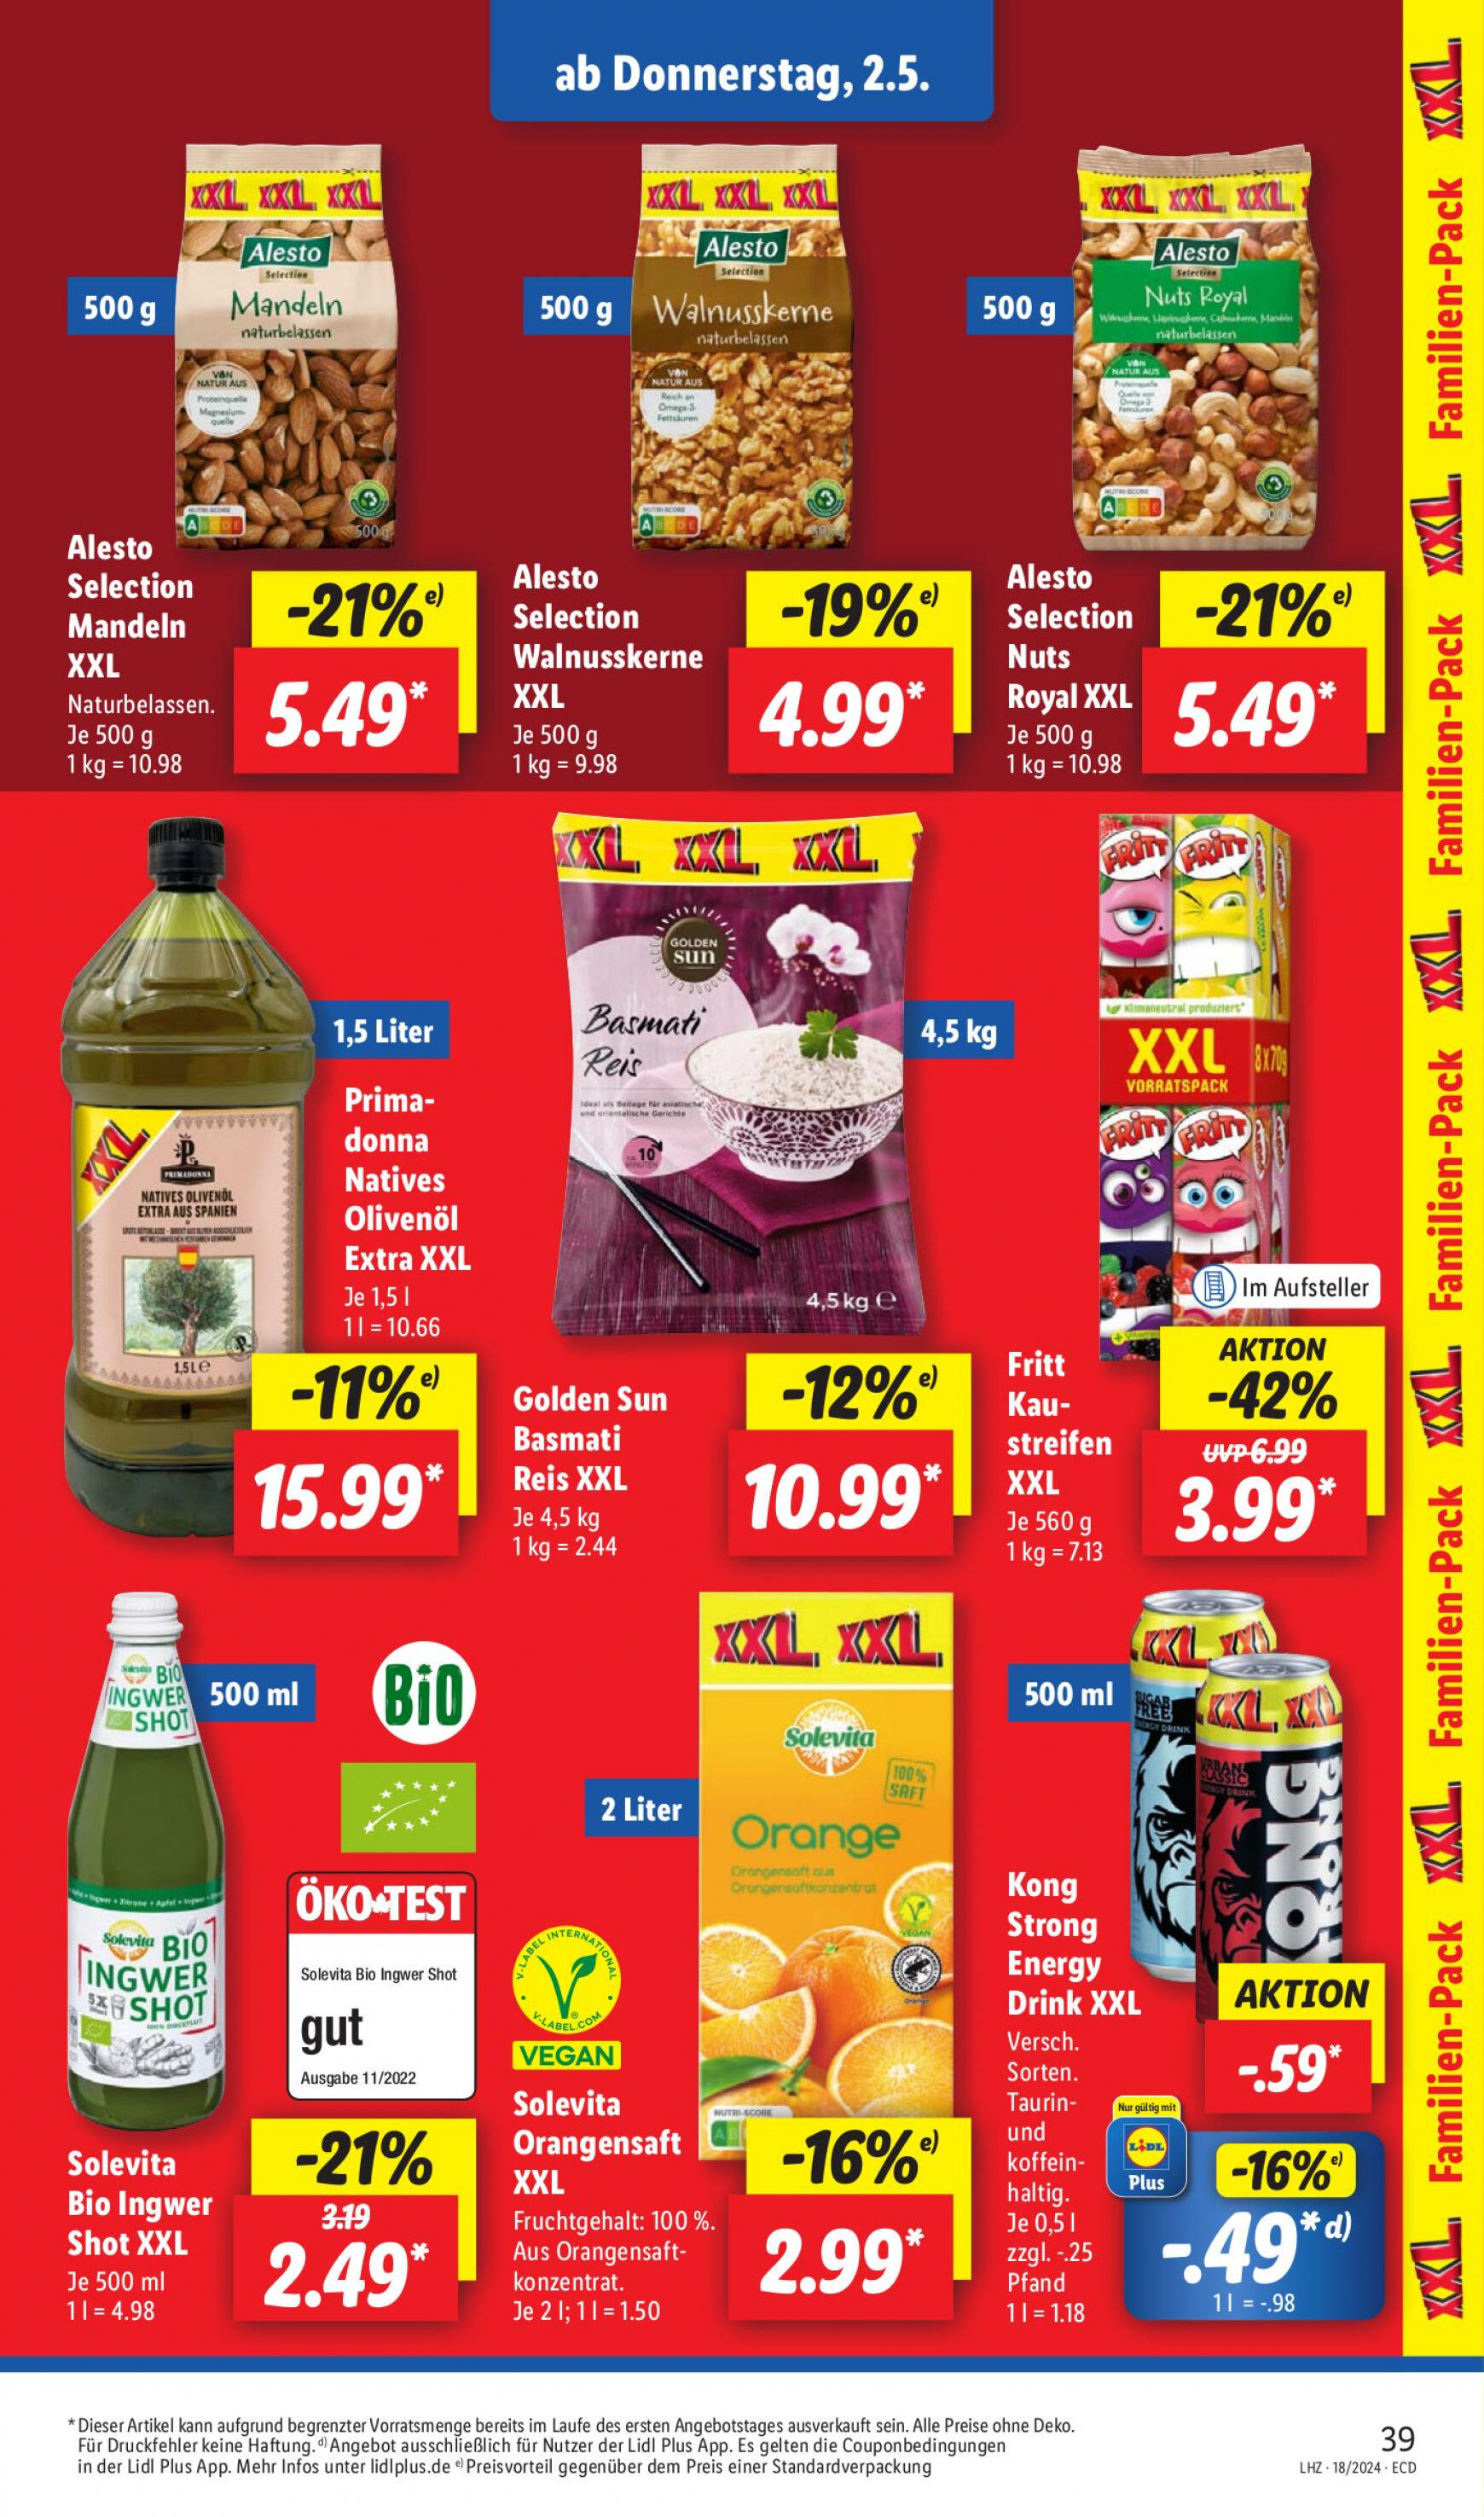 lidl - Flyer Lidl aktuell 29.04. - 04.05. - page: 47